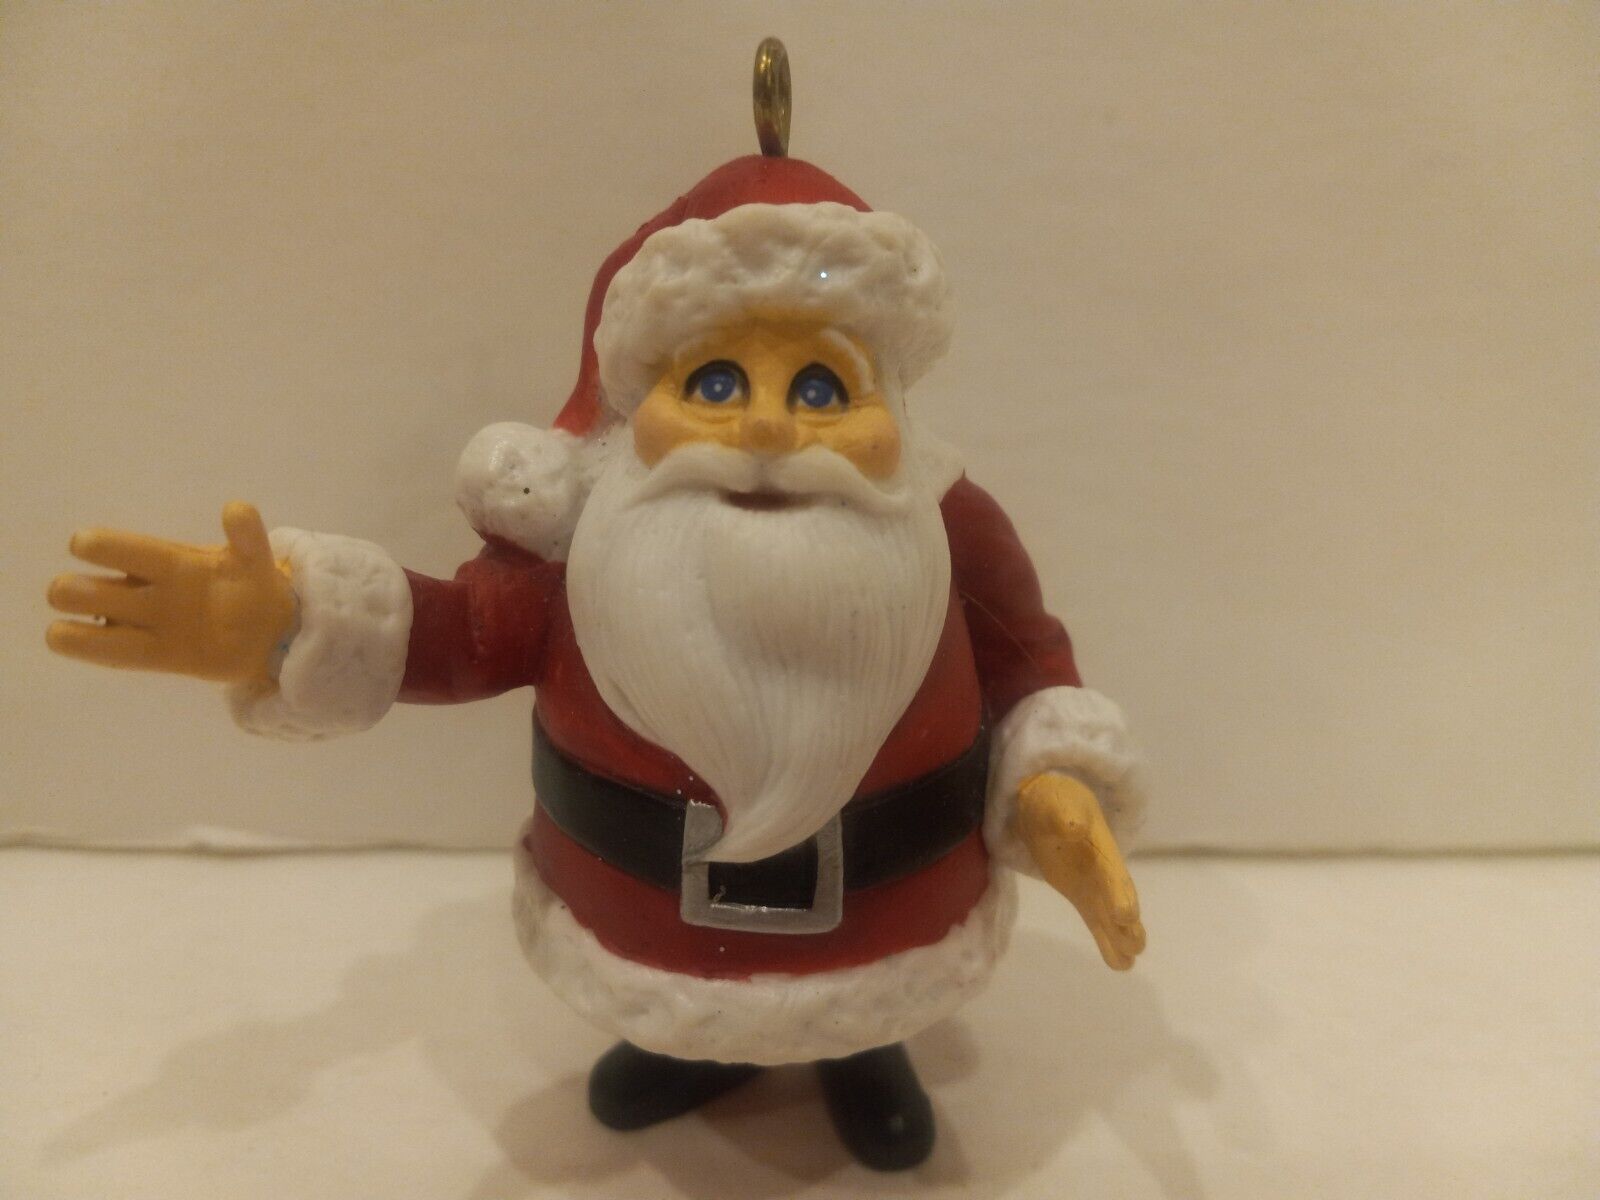 Playing Mantis Santa Claus Is Coming To Town keychain Ornament 2004